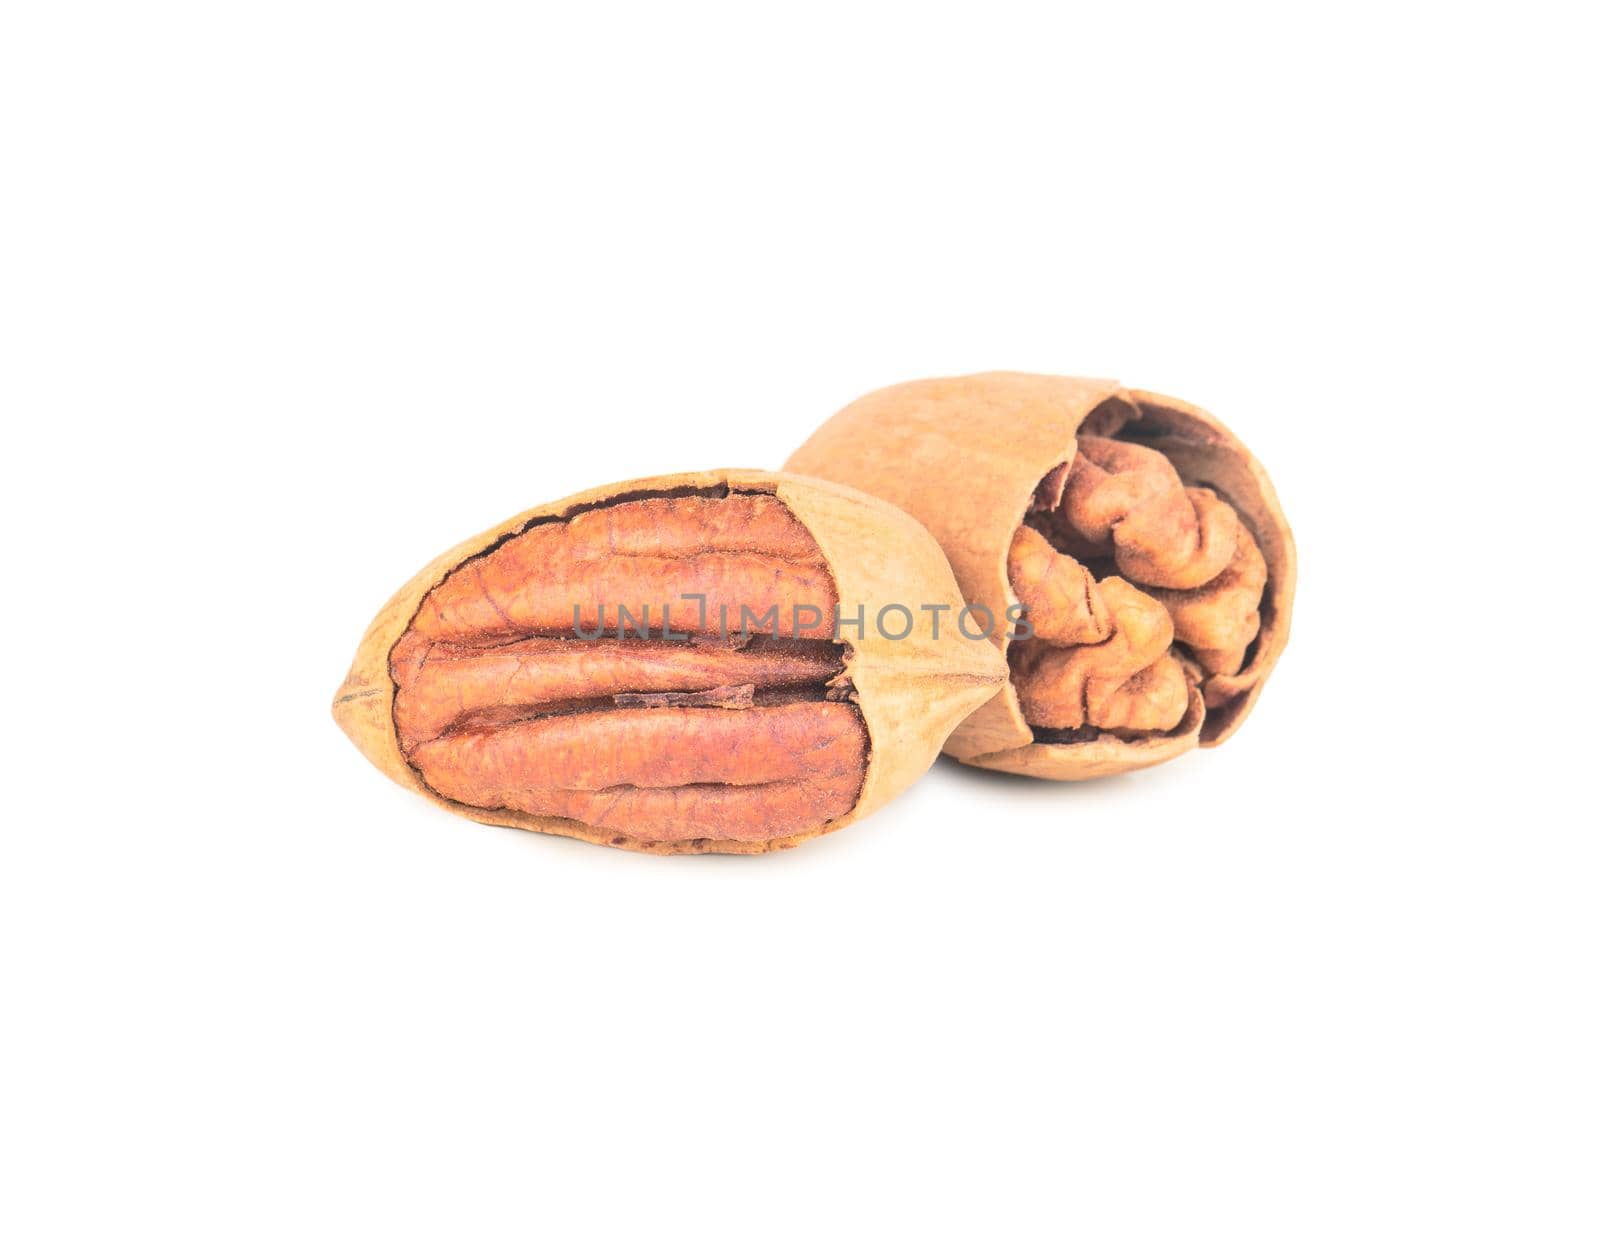 Two dry pecans in cracked shells on a white background